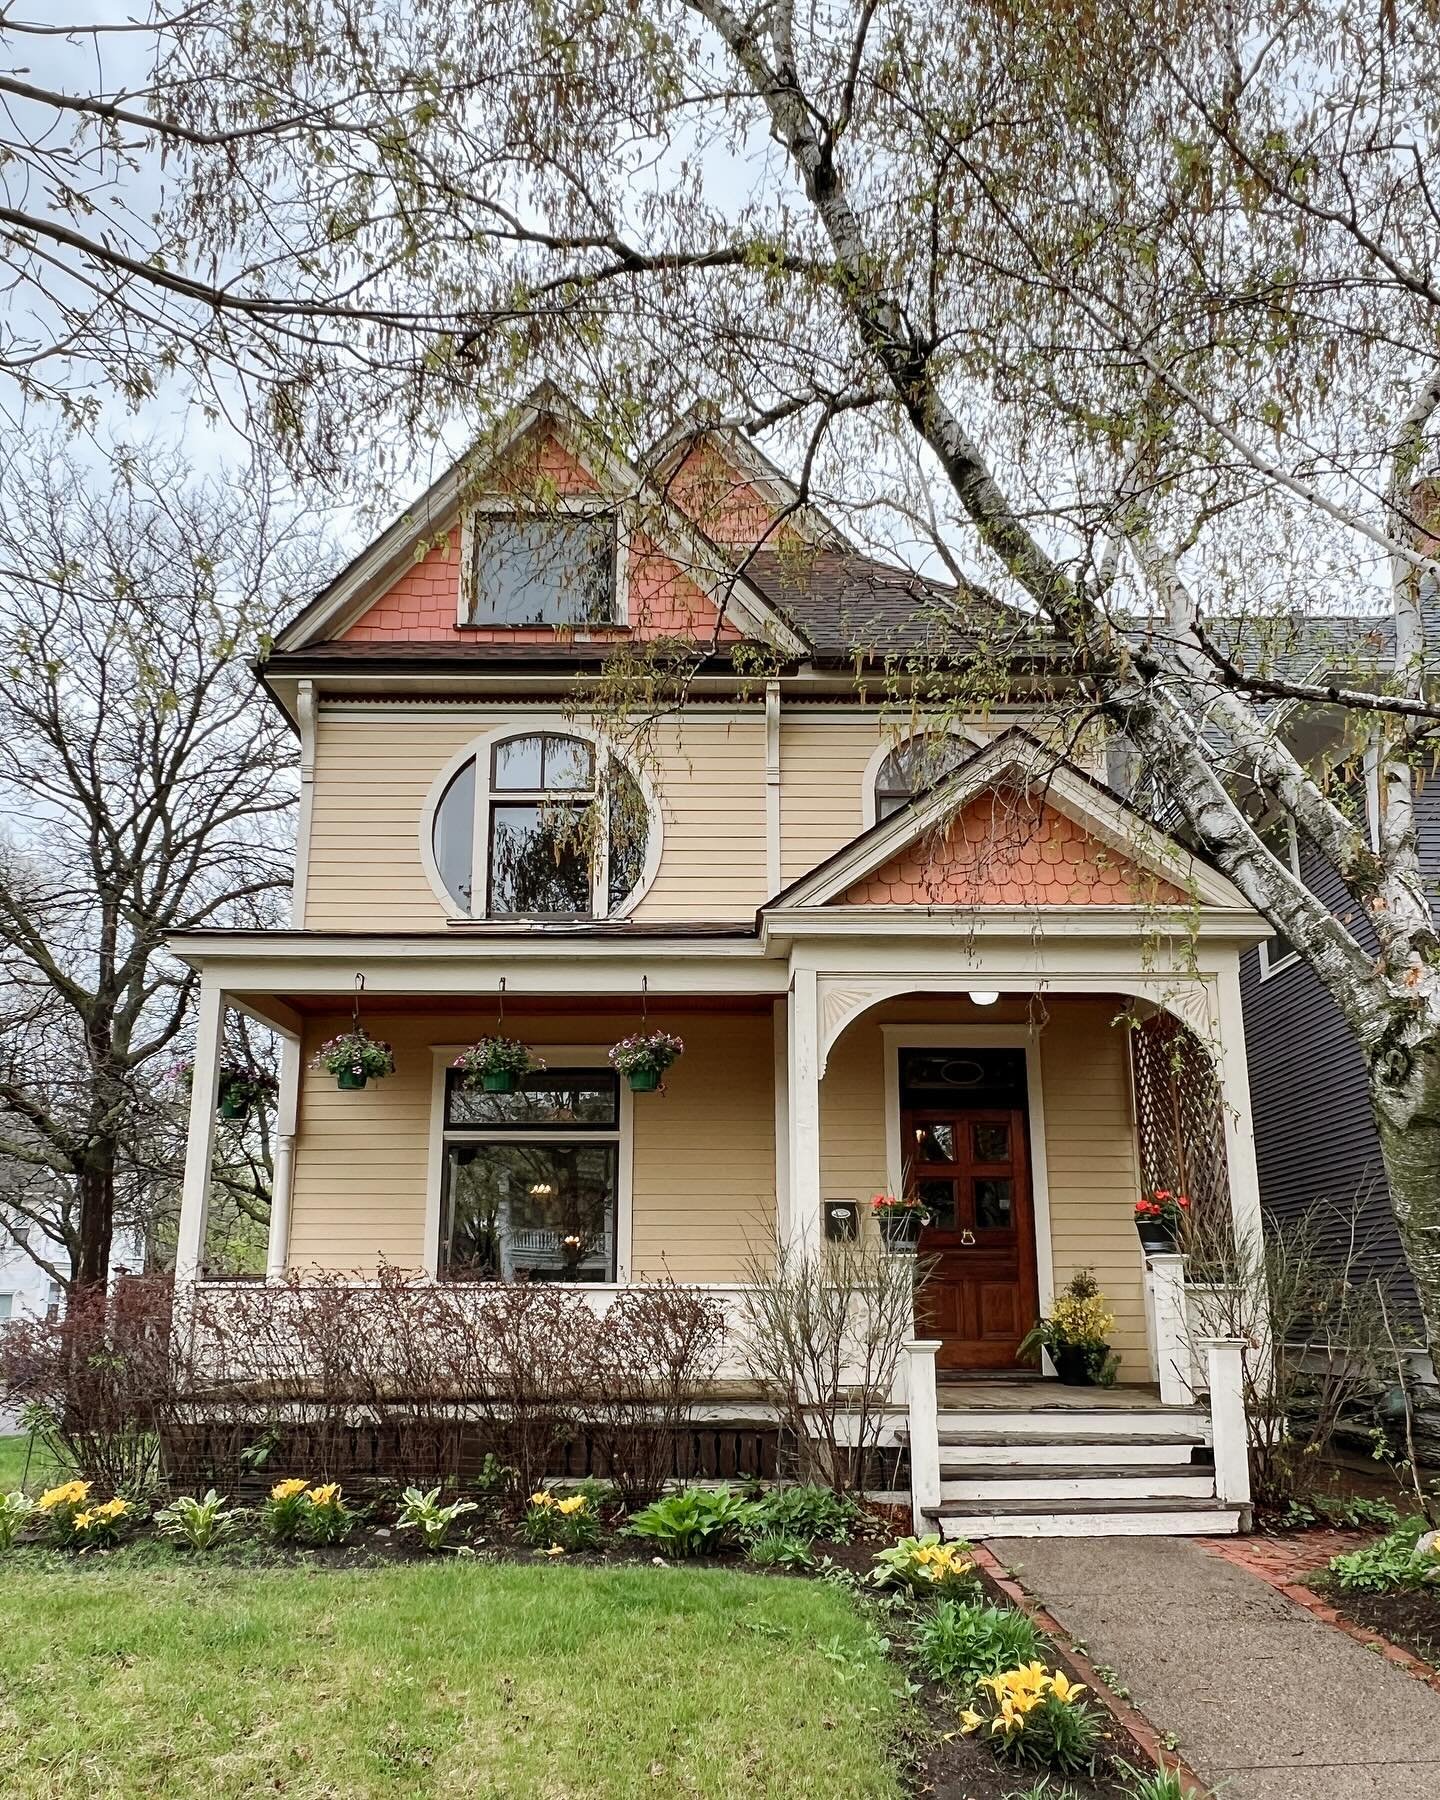 I toured this lovely victorian last week and i had to share. They did a lovely job of honoring the history of this home while adding modern conveniences. Its already pending and rightfully so!

Interested in finding your own home to love? Fill out my